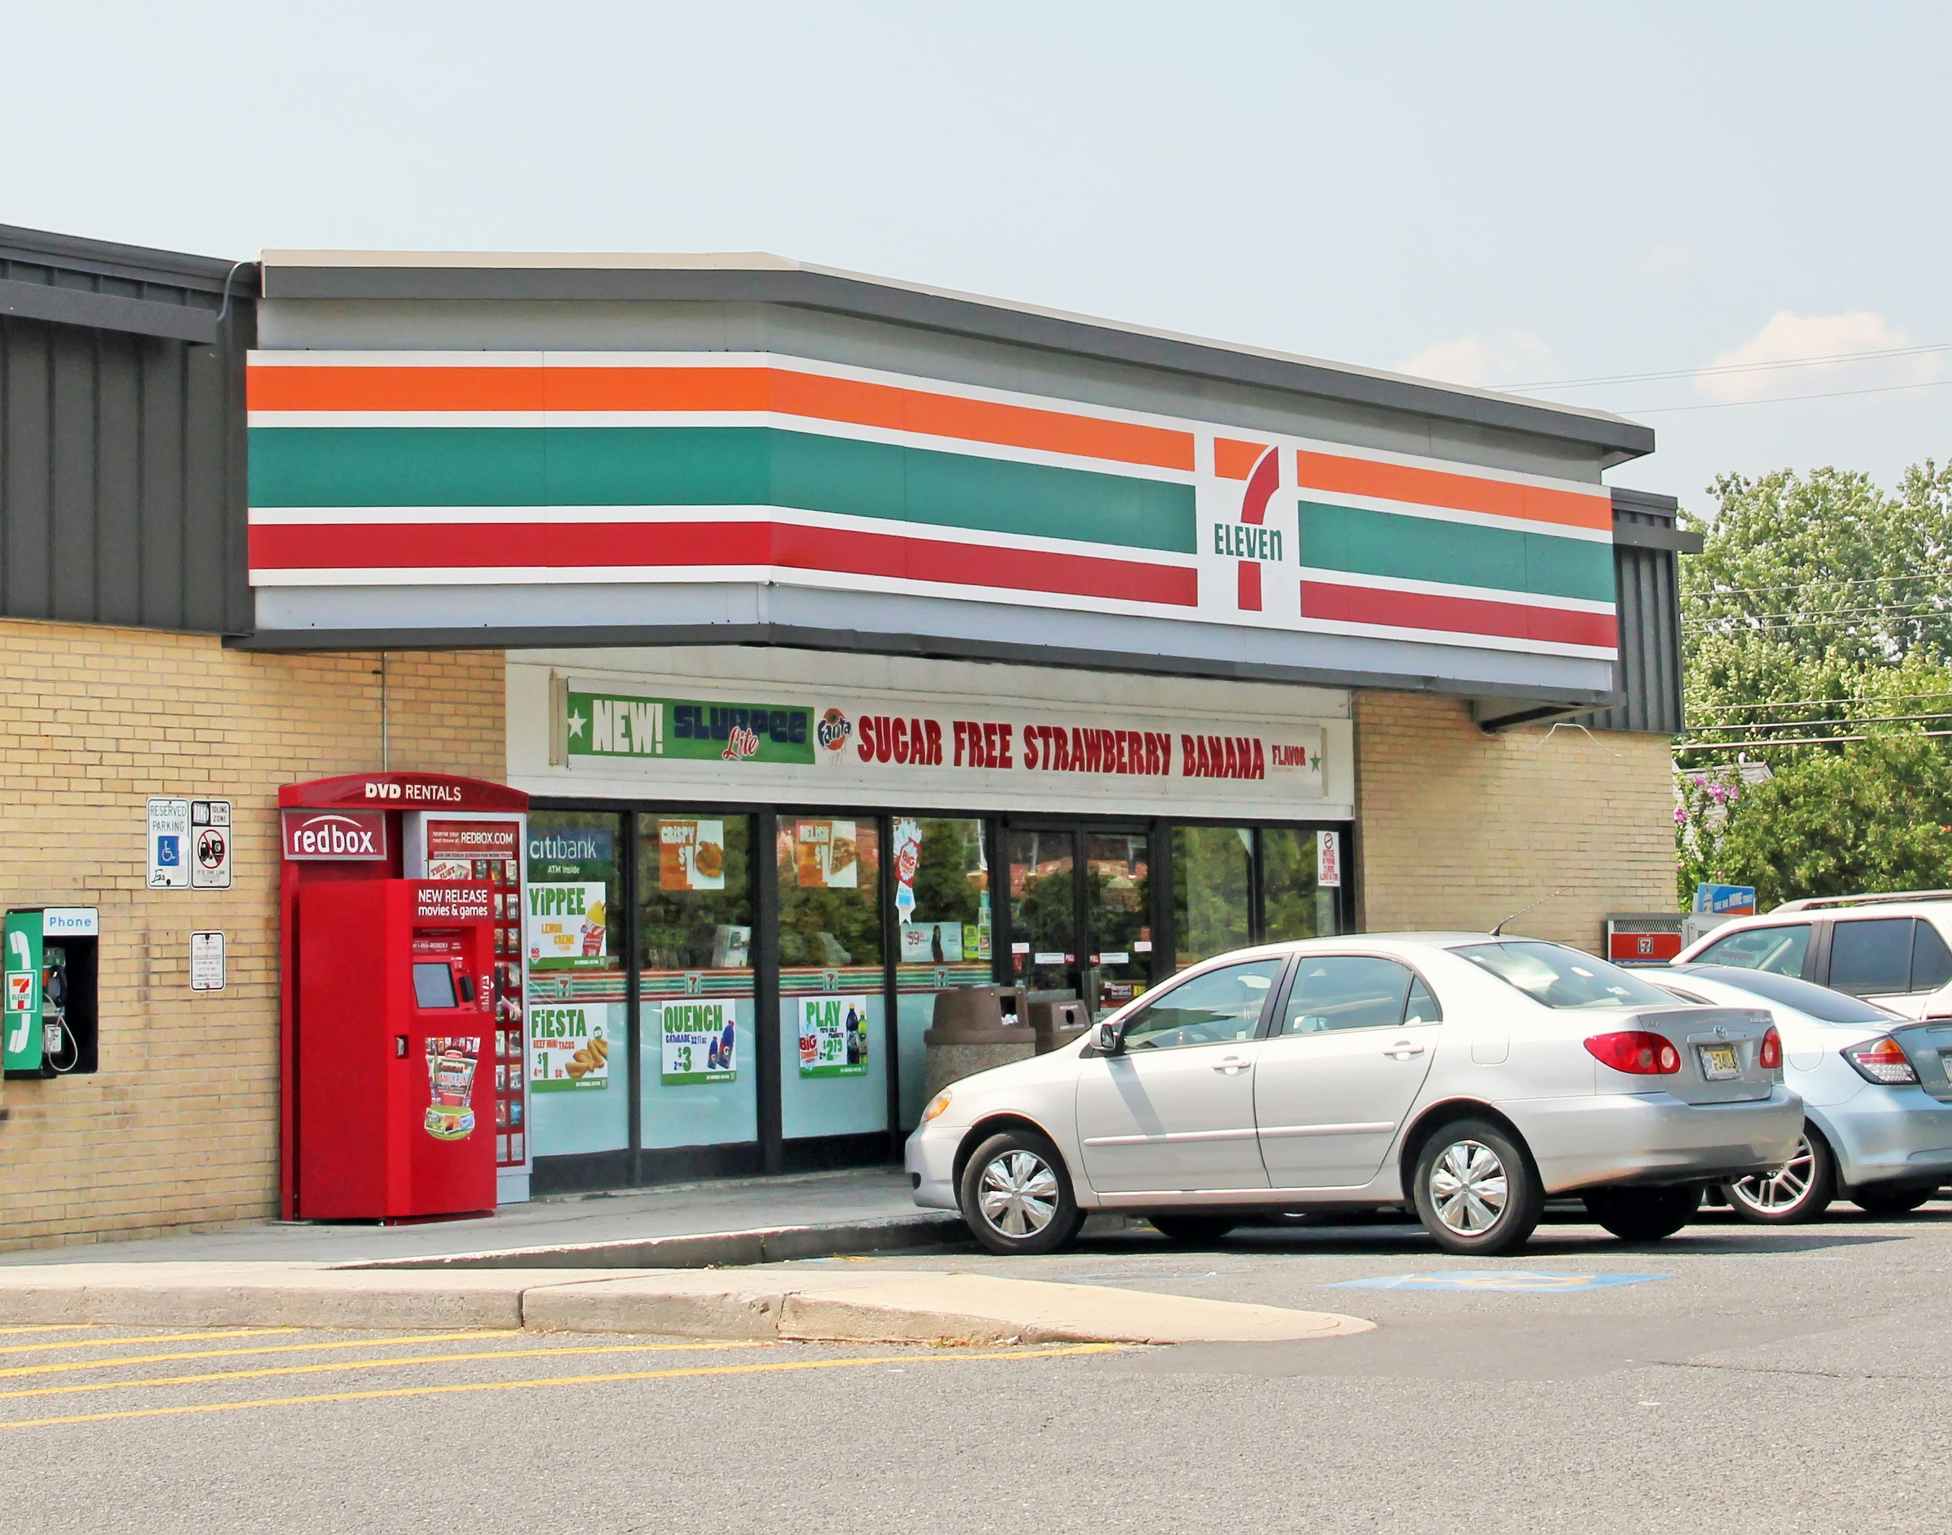 A 7-eleven store with cars parked in front.